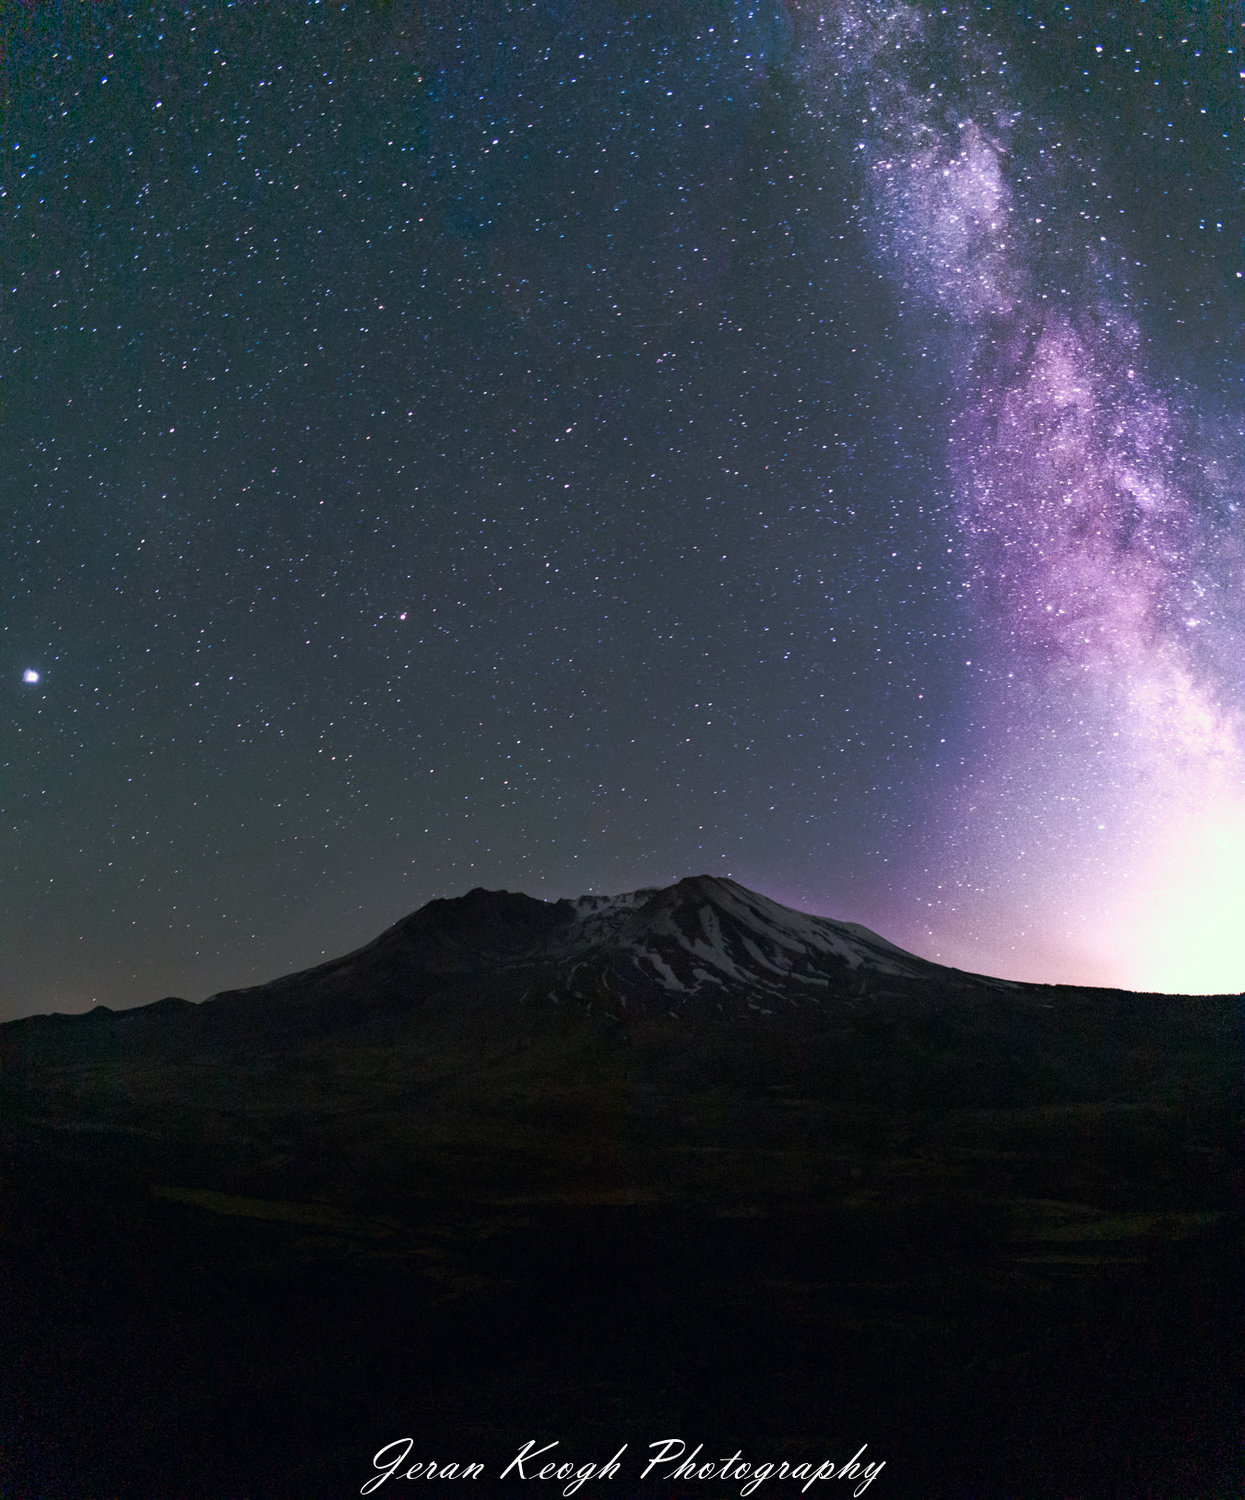 This photo of the Milky Way over Mount St. Helens was captured recently at Johnston Ridge by Castle Rock photographer Jeran Keogh.